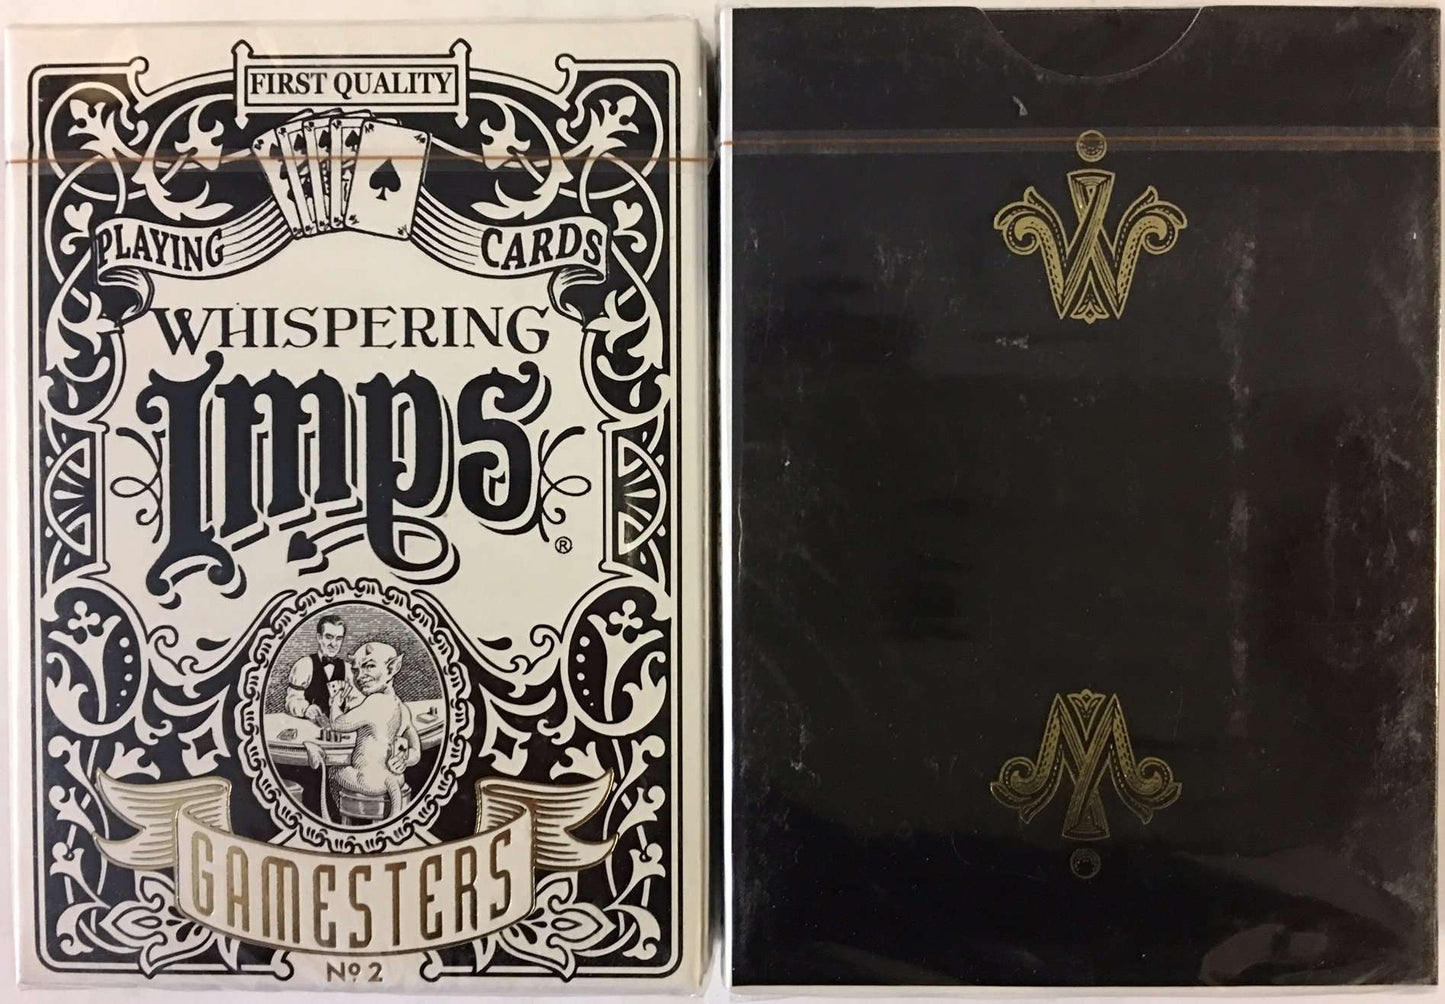 PlayingCardDecks.com-Whispering Imps Gamesters Limited Edition Playing Cards EPCC: Black Gold